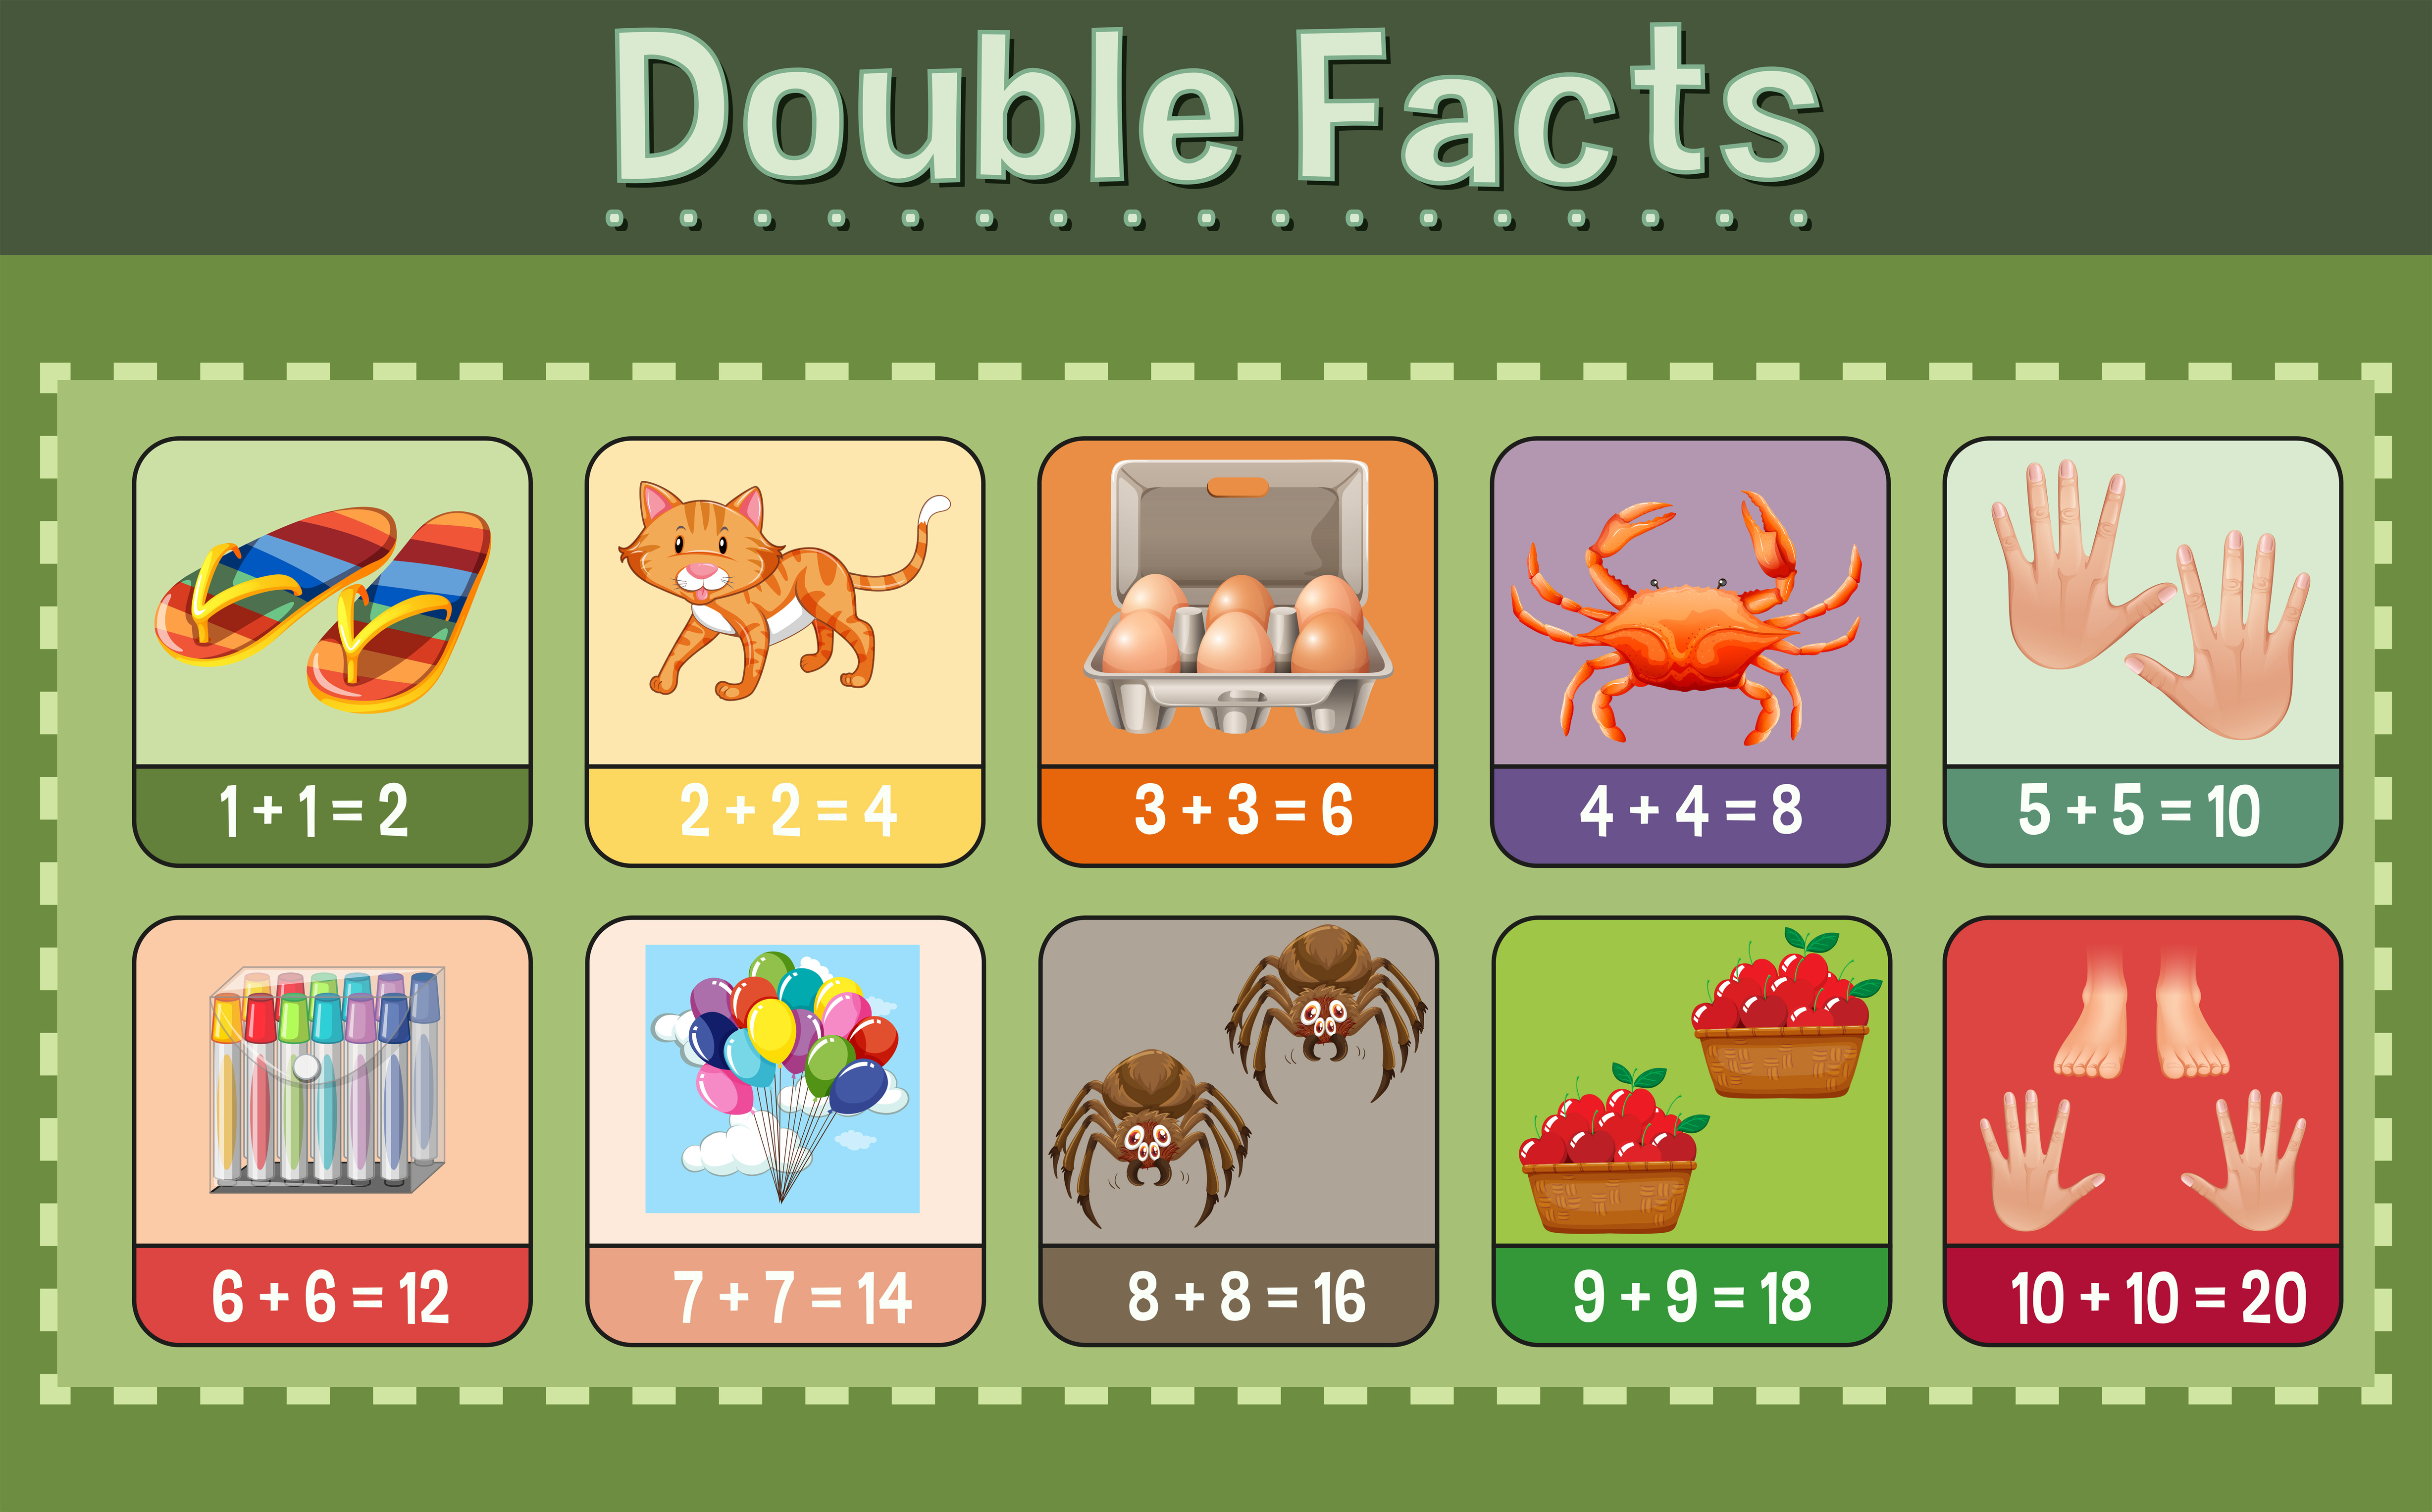 Boost Your Math Skills with 10 Fun Doubles Facts - Facts.net